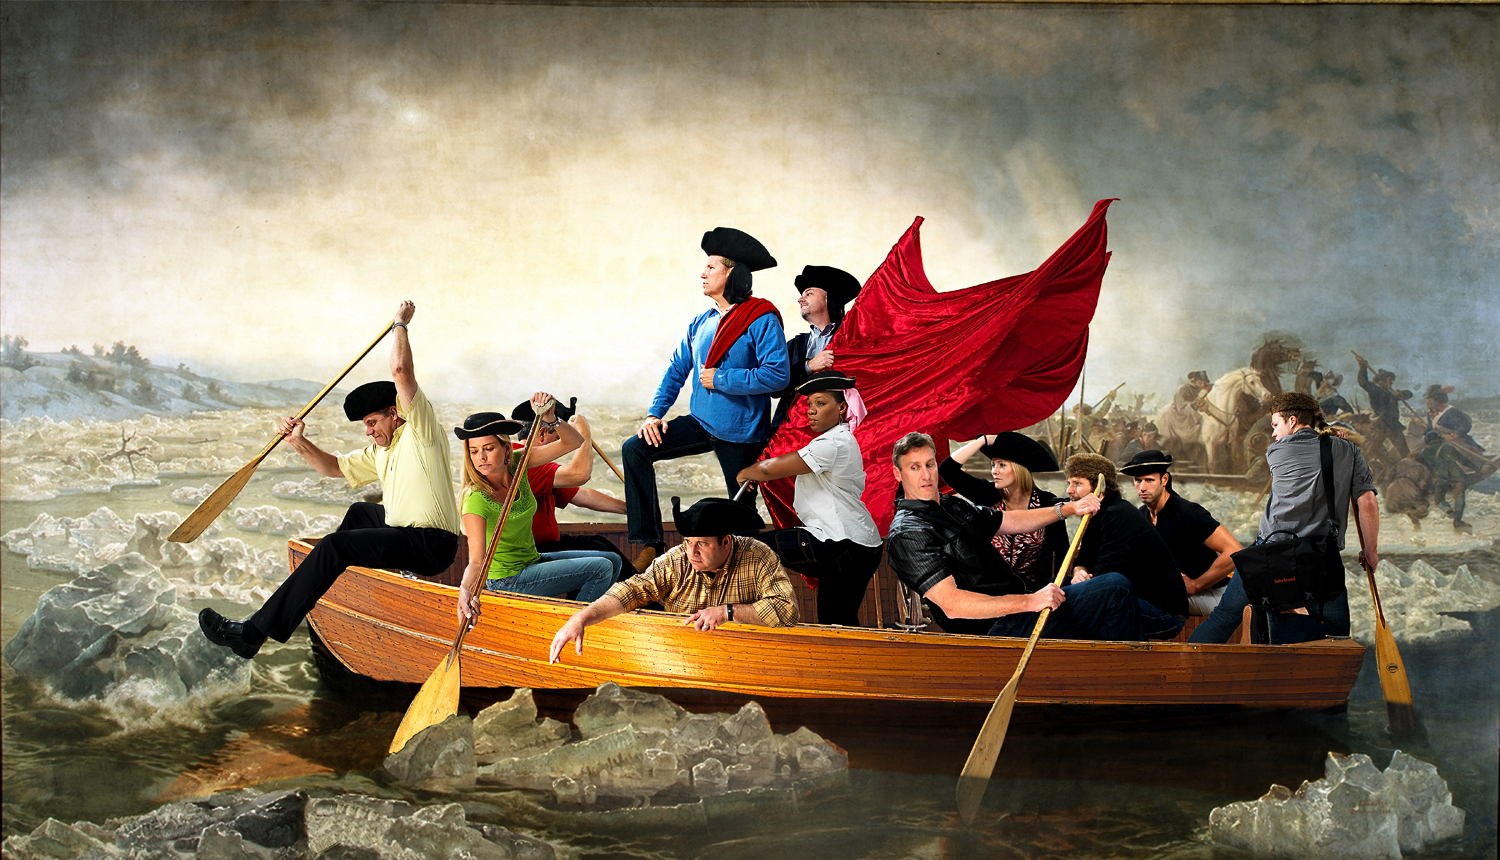 Lucas Stamates, Interbrand Crossing the Delaware, 2010. Digital Capture, Digital Print, 20 x 24 inches. Courtesy of Lucas Stamates